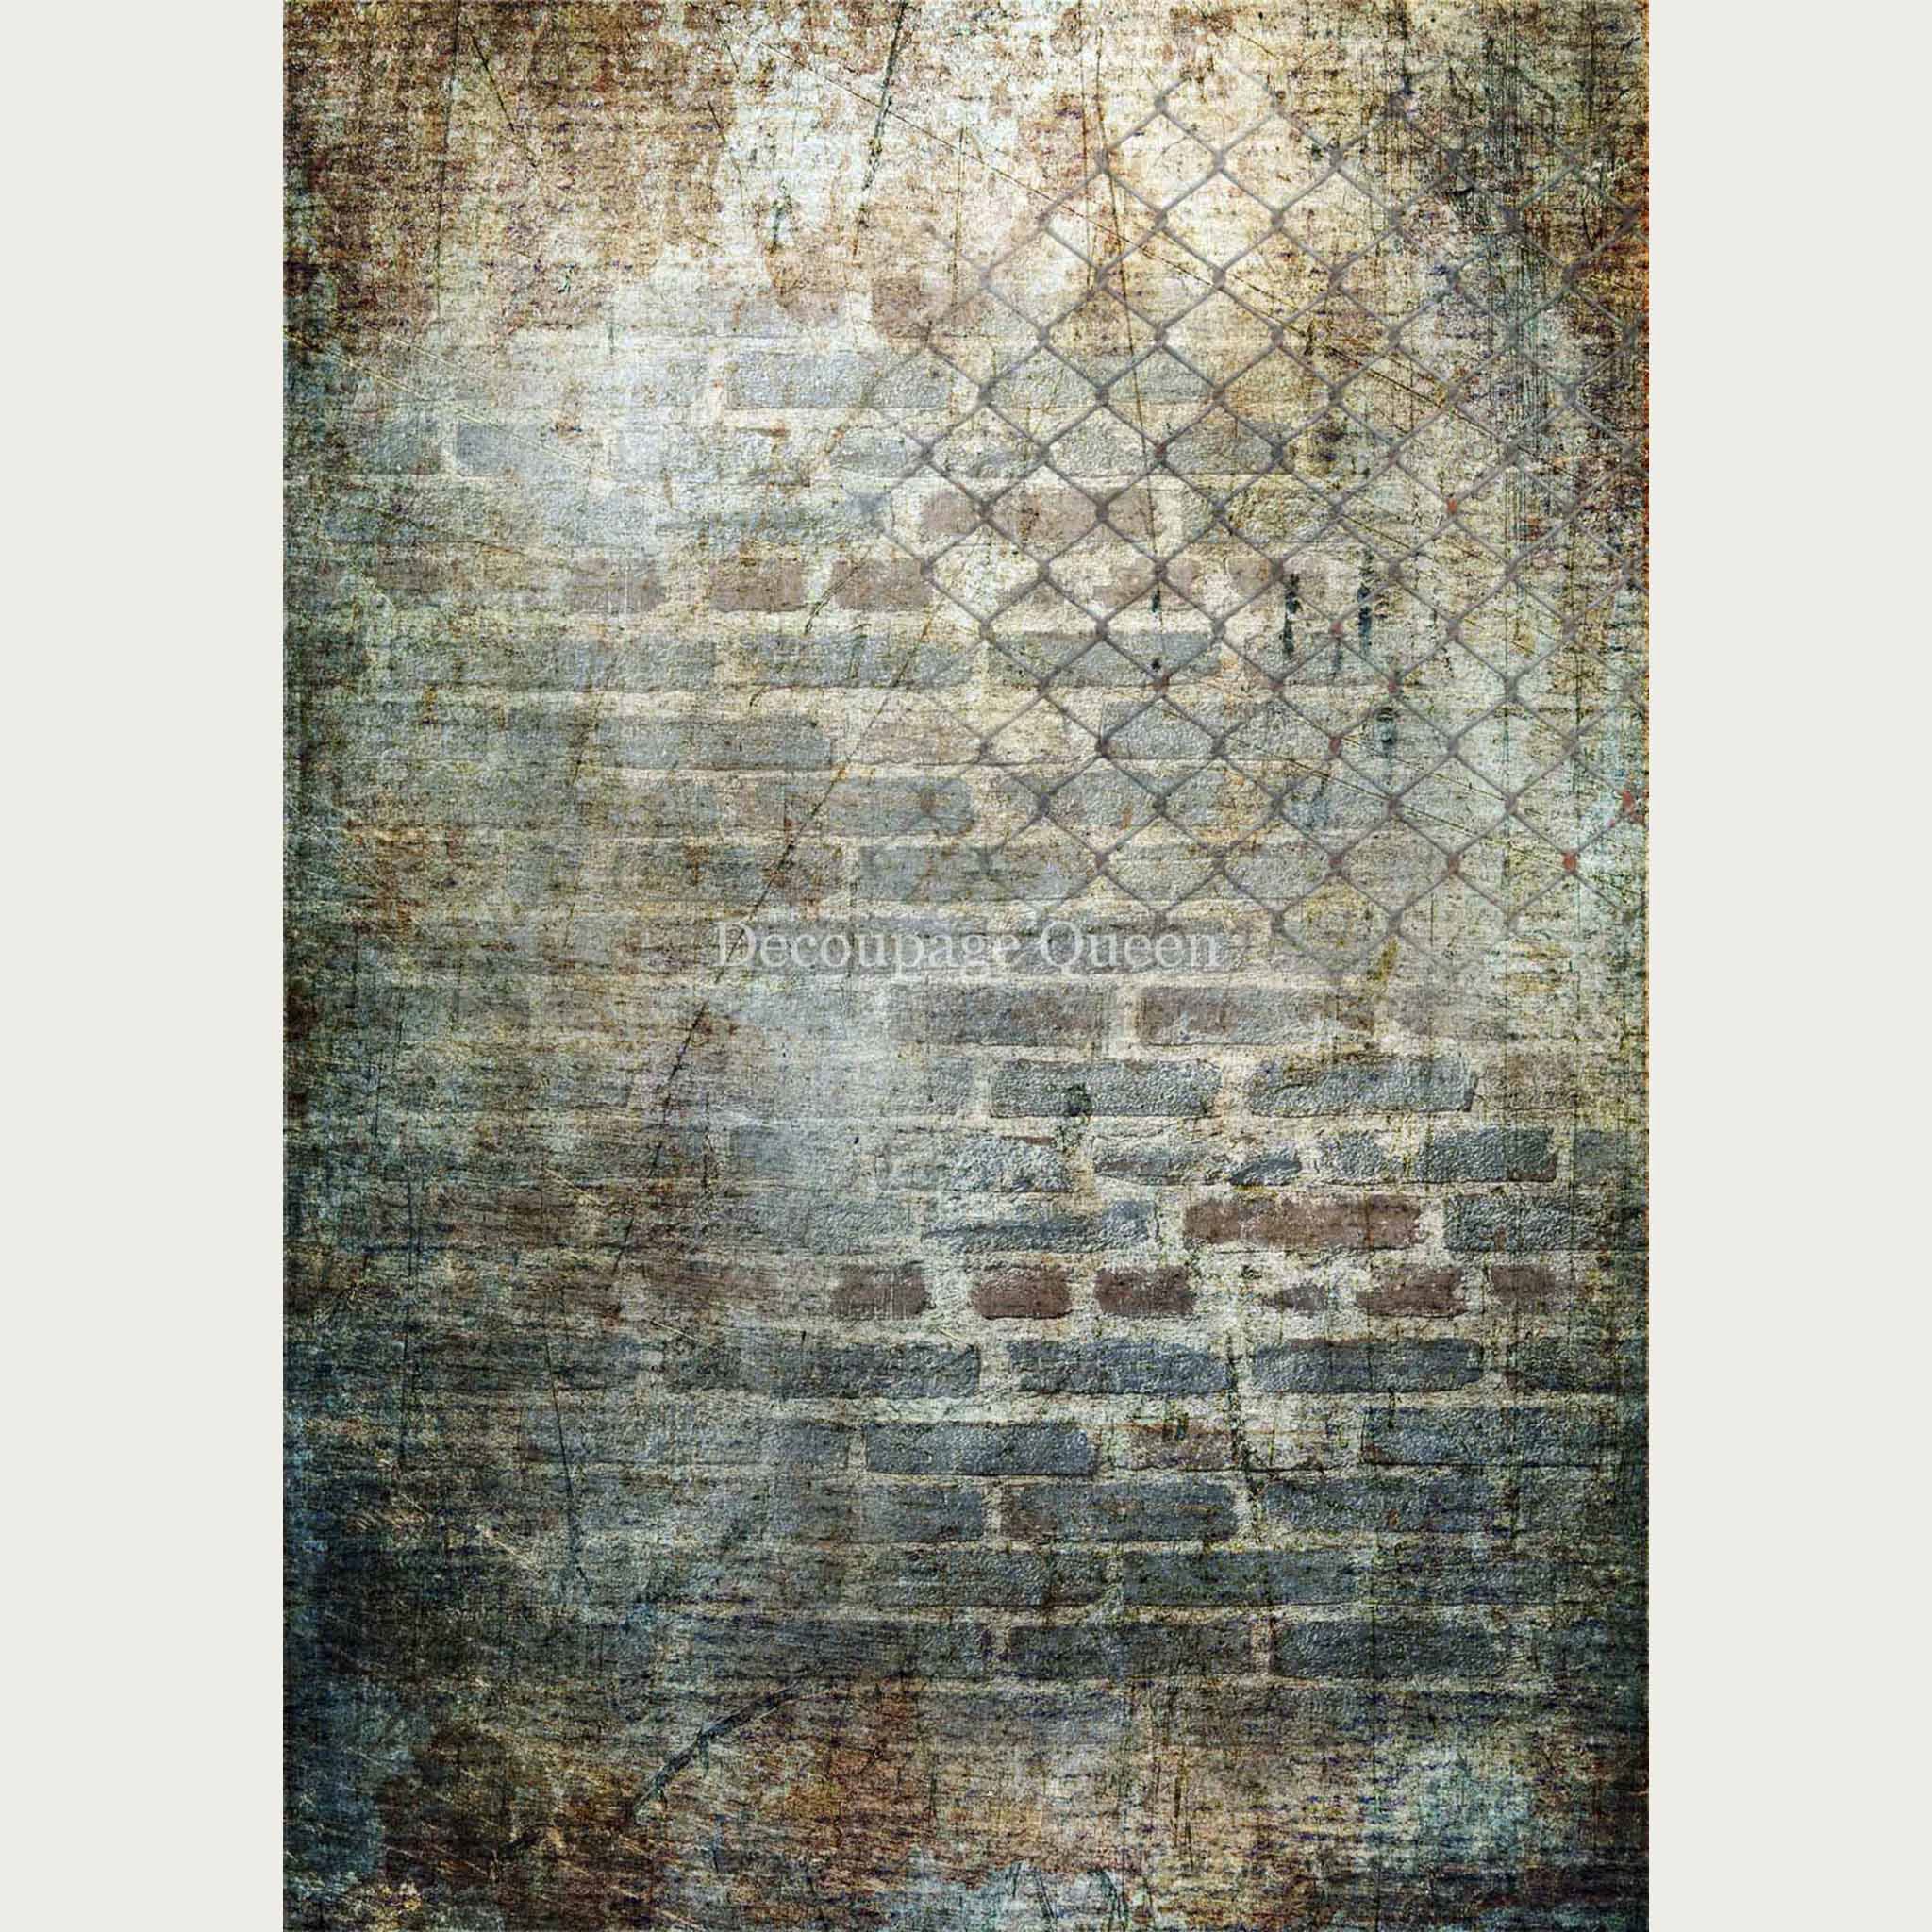 A distressed brick wall design with an overlay of a faded chain link fence on the top right. White borders are on the sides.